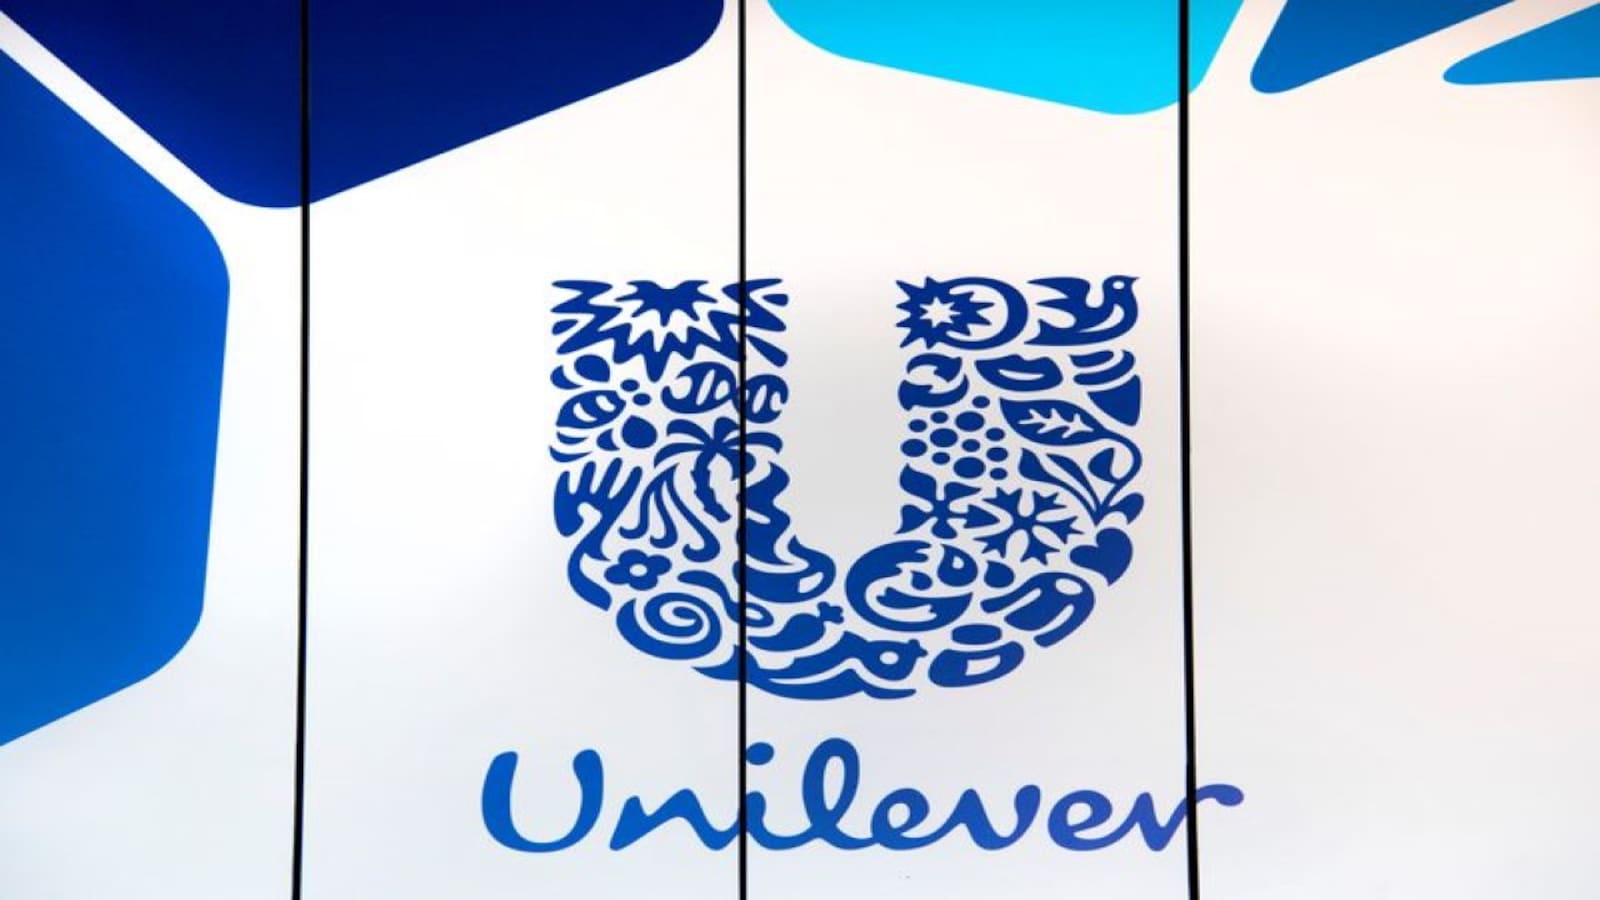 Did you know the Unilever logo is made of 25 symbols that represent sustainable living?